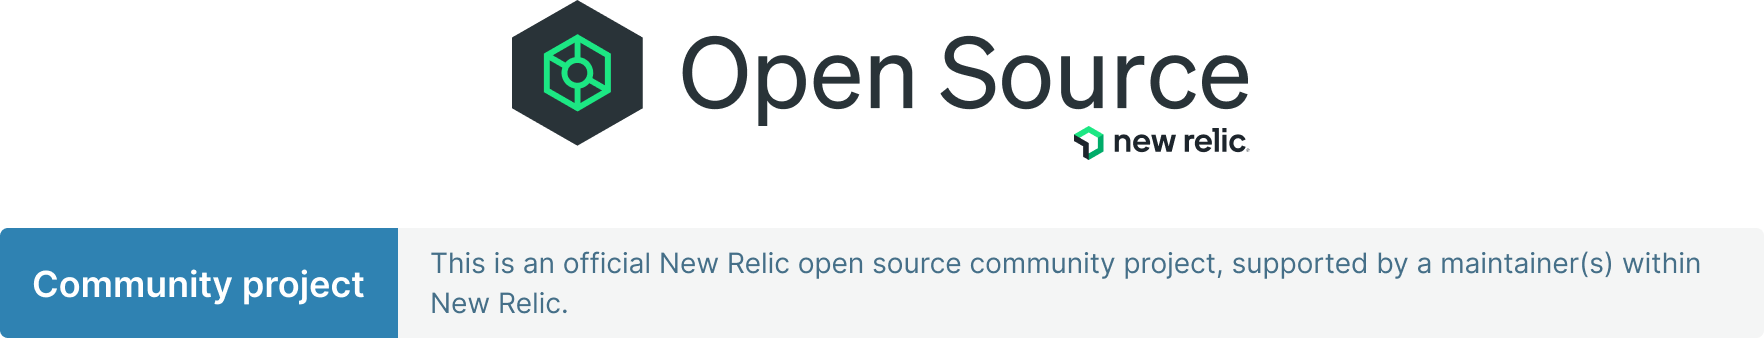 New Relic Open Source community project banner.